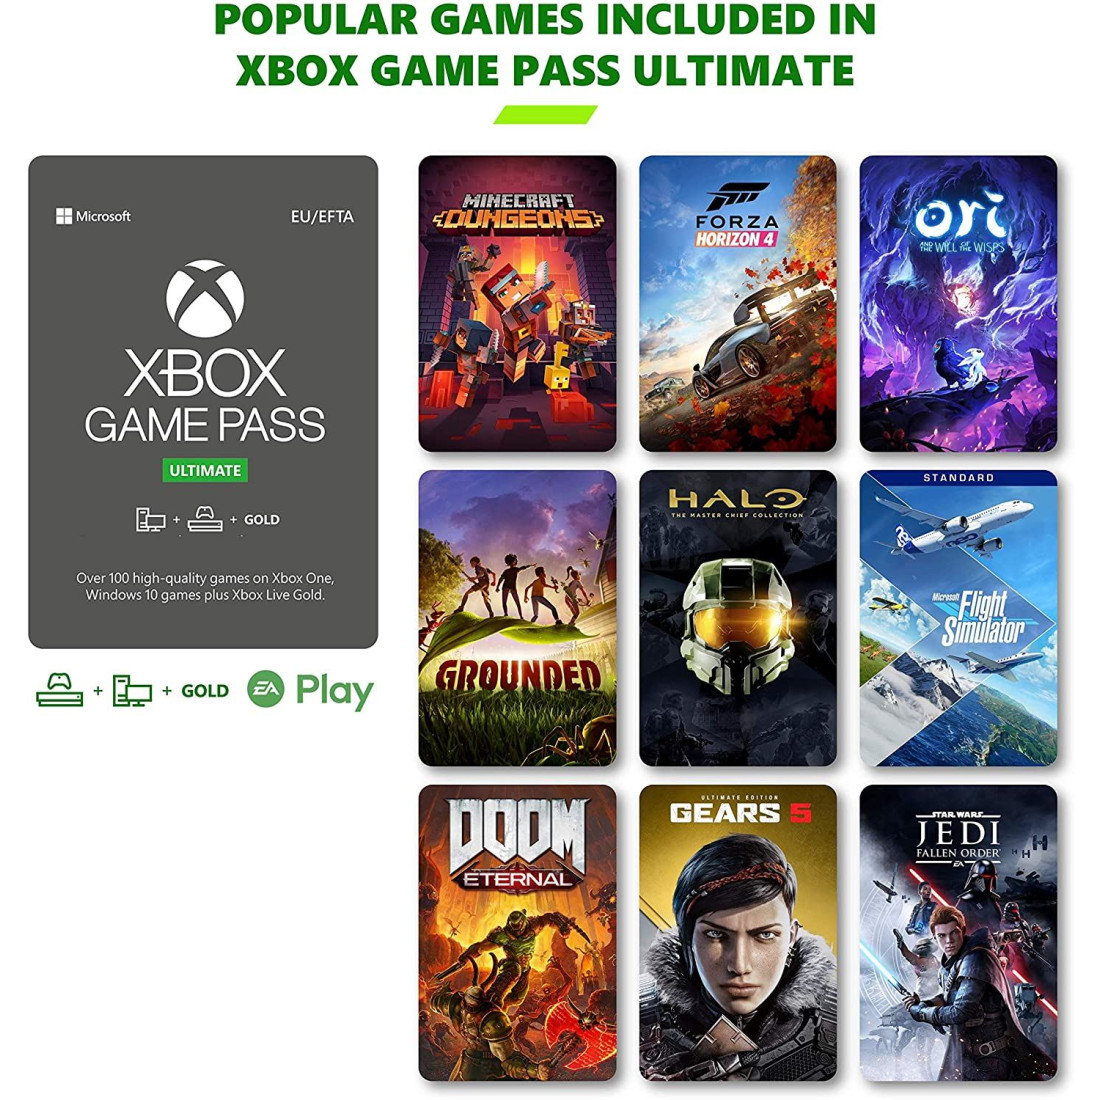 get 3 months of xbox game pass ultimate for $1